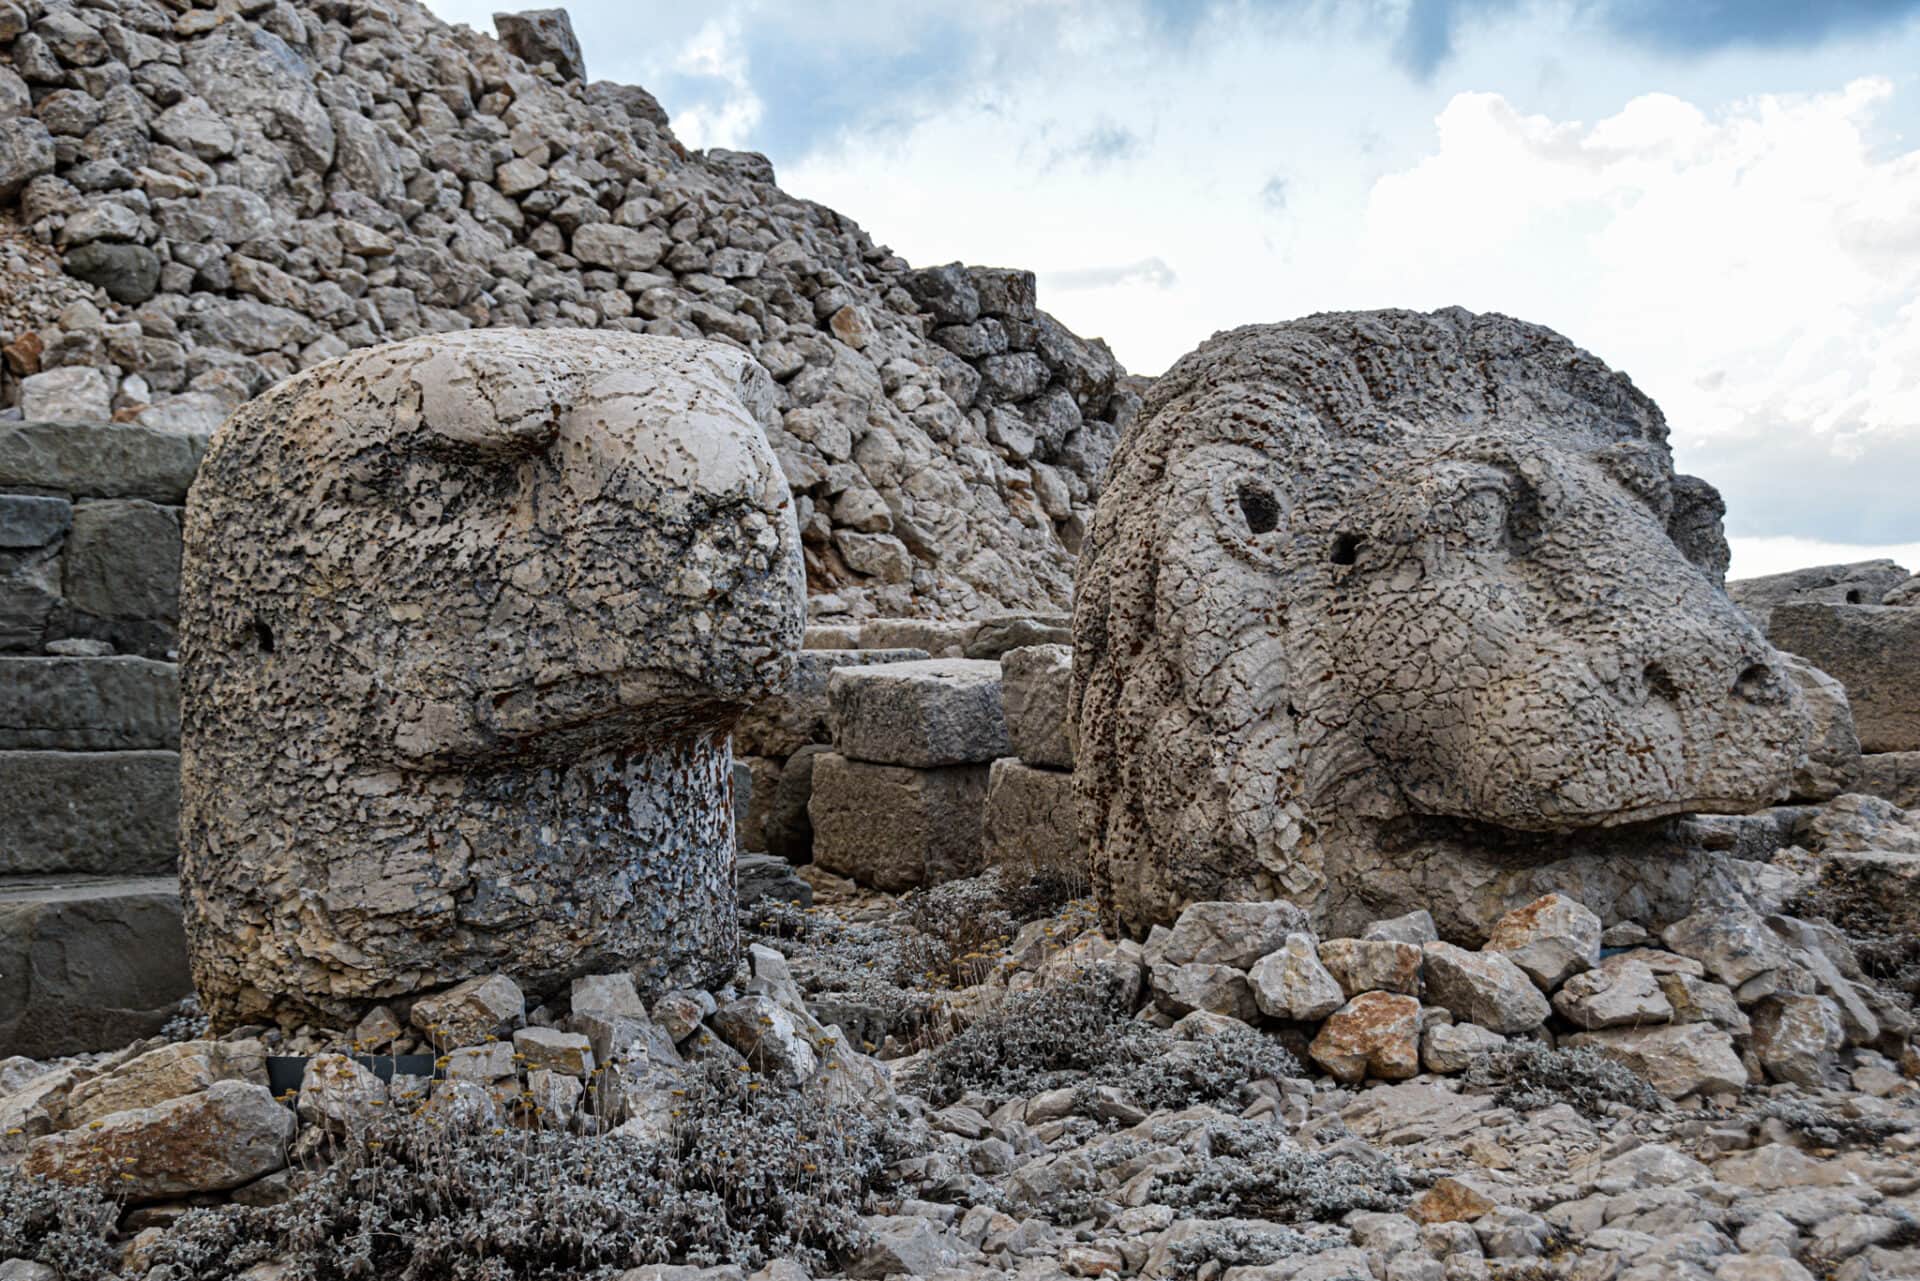 the decapitated stone heads of a lion and eagle statue sit on the rocky ground on Mount Nemrut